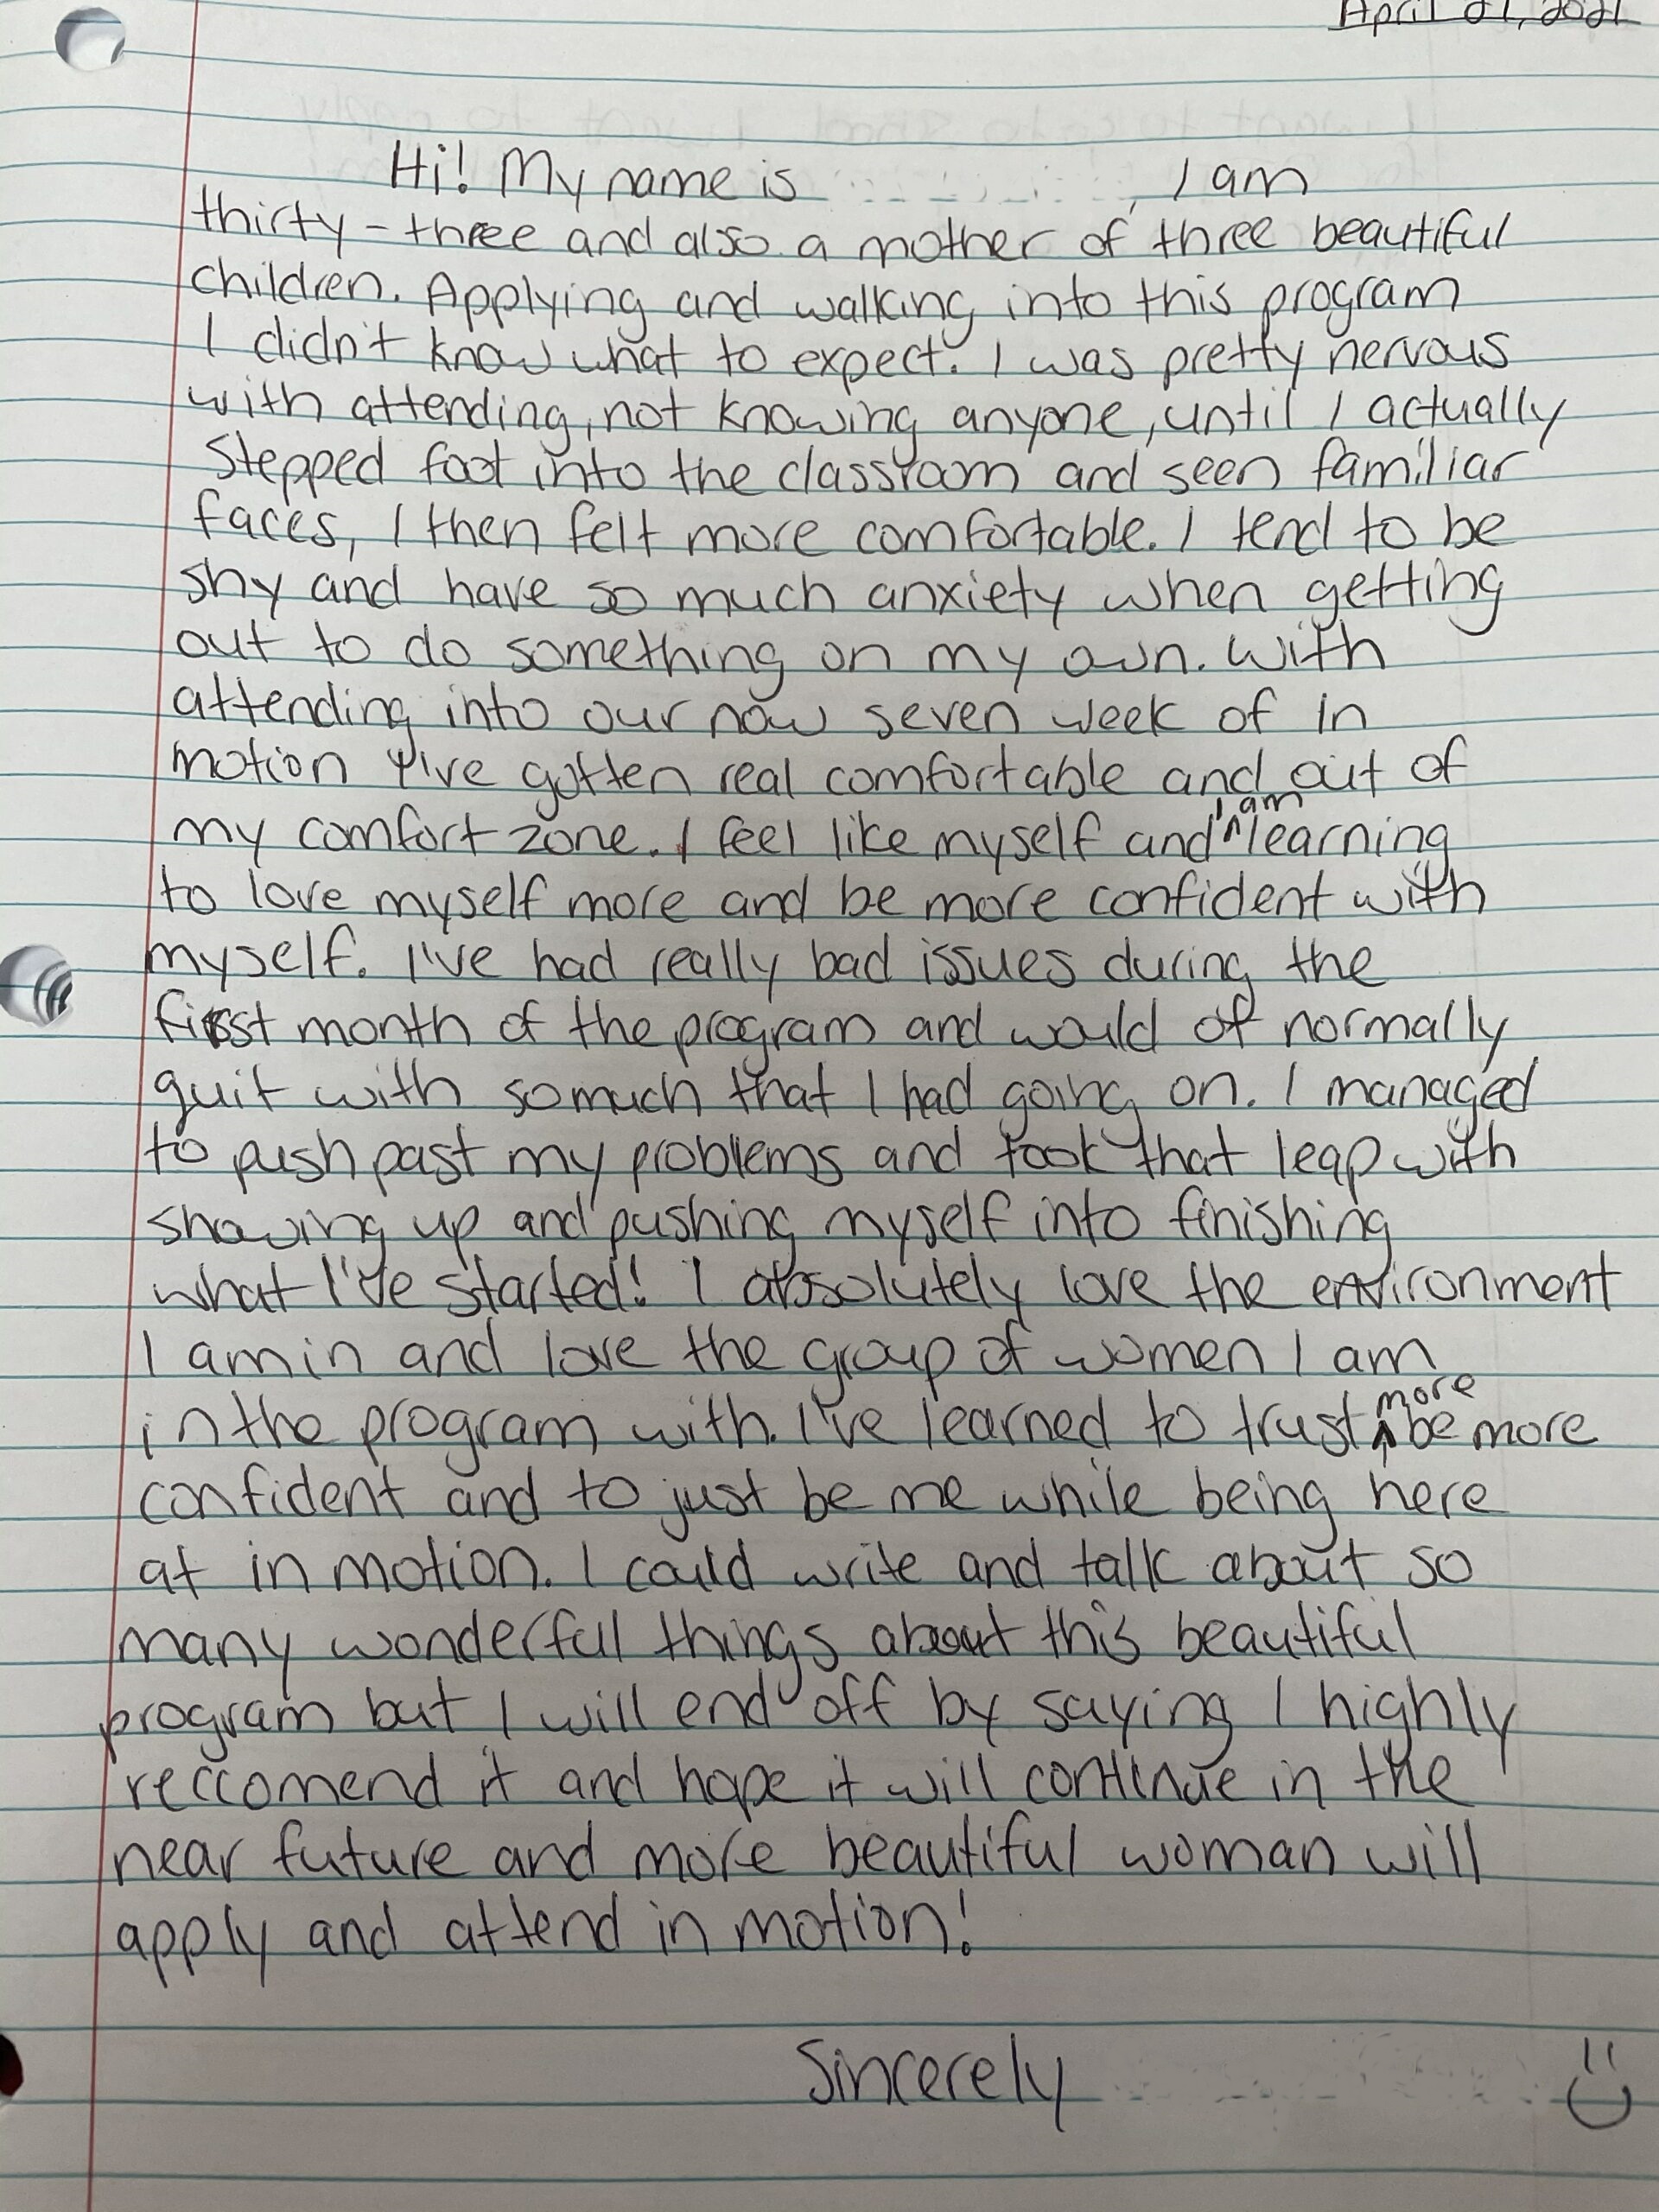 Image of written testimonial from IM&M+ Participant: Hi, I am 33 and also a mother of 3 beautiful children. Applying and walking into this program I didn't know what to expect. I was pretty nervous with attending, not knowing anyone until I actually stepped foot into the classroom and seen familiar faces. I then felt more comfortable. I tend to be shy and have so much anxiety when getting out to do something on my own. With attending into our now 7th week of In Motion I've gotten real comfortable and out of my comfort zone. I feel like myself and I am learning to love myself more and be more confident with myself. I've had really bad issues during the first month of the program and would of normally quit with so much that I had going on. I managed to push past my problems and took that leap with showing up and pushing myself into finishing what I've started! I absolutely love the environment I am in and love the group of women I am in the program with. I've learned to trust more, be more confident and to just be me while being here at in motion. I could write and talk about